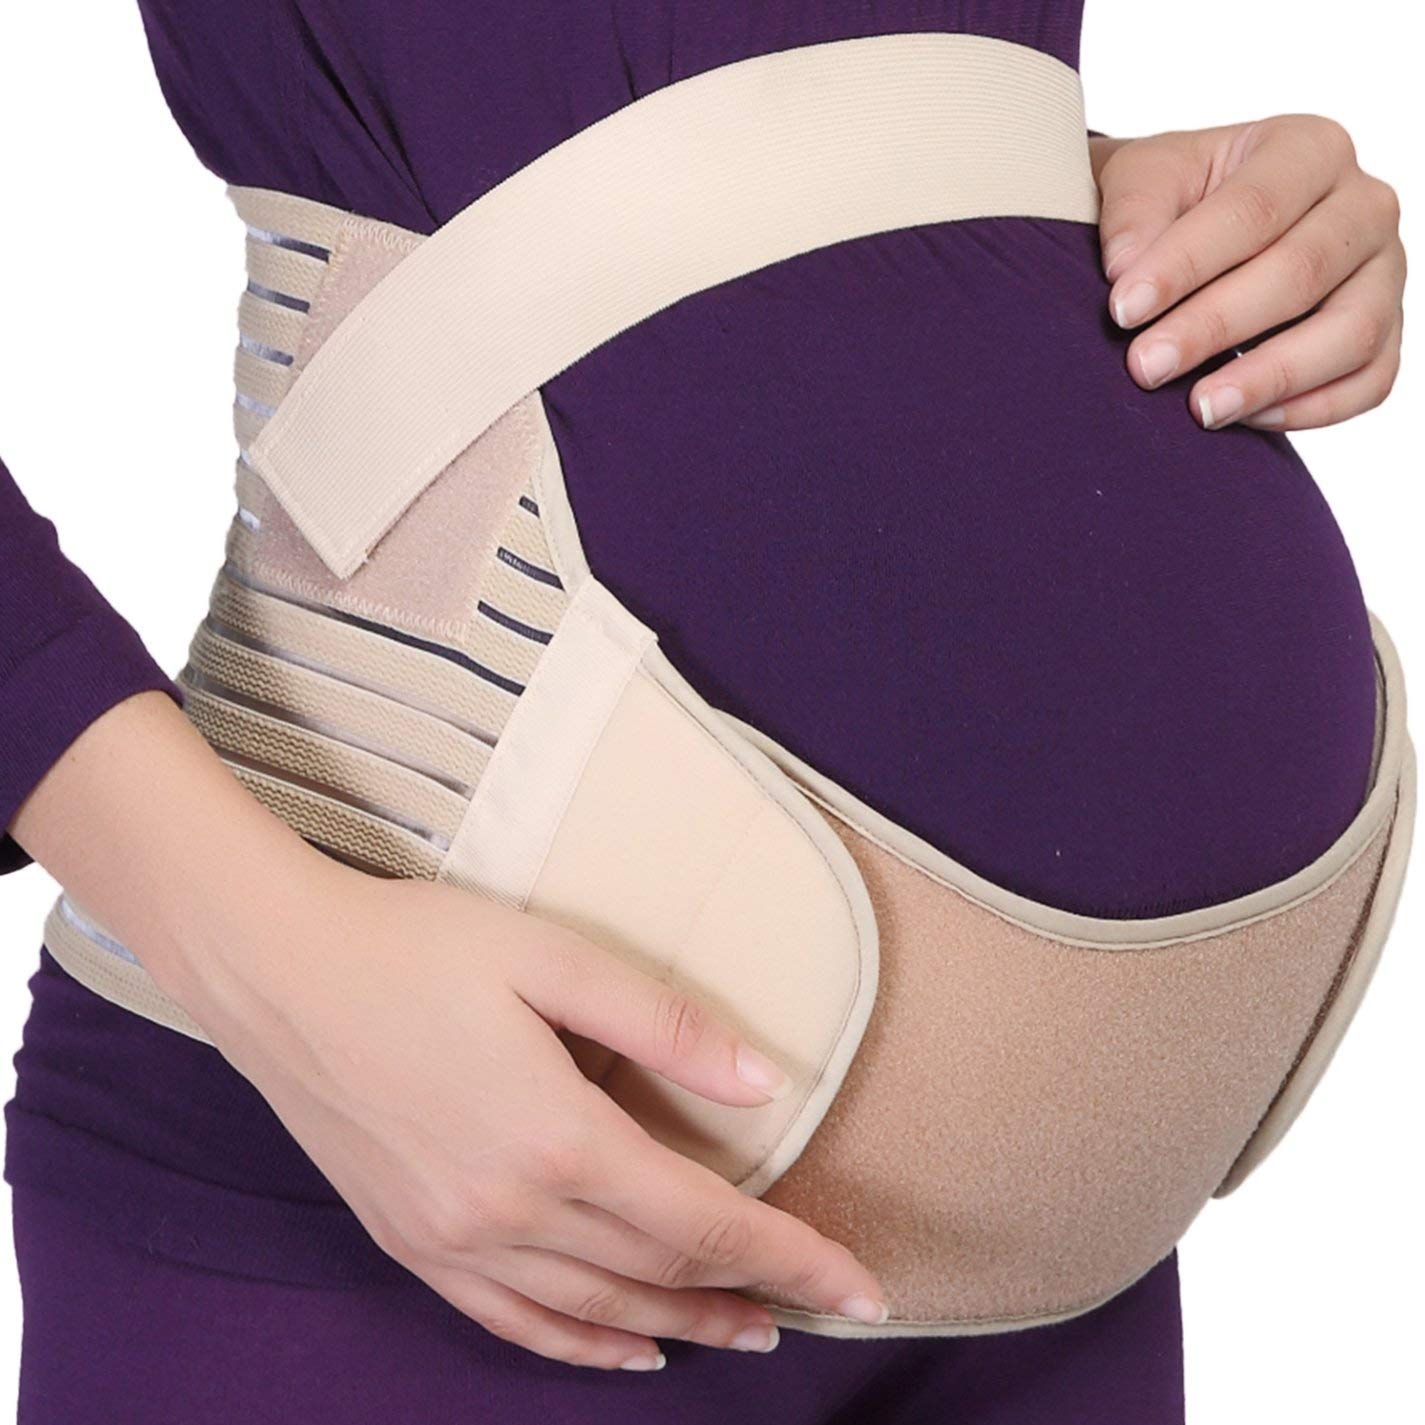 NeoTech Care Brand Maternity Belt, neotech care, maternity belt after delivery, stretching exercise during pregnancy, after delivery belt, abdominal belt post pregnancy, after birth belts, maternity belt and pregnancy, pregnant stretches, post maternity belt, pregnant stretching exercise, neotech fluid generator, maternity belt reviews, maternity girdle, pregnancy support belt, pregnancy belt for back pain, support belts for pregnancy, pregnancy belts, best maternity belt for back pain, maternity belt reviews, best maternity belt, maternity back support belt, best maternity belts, pregnancy support band, back support for pregnant ladies